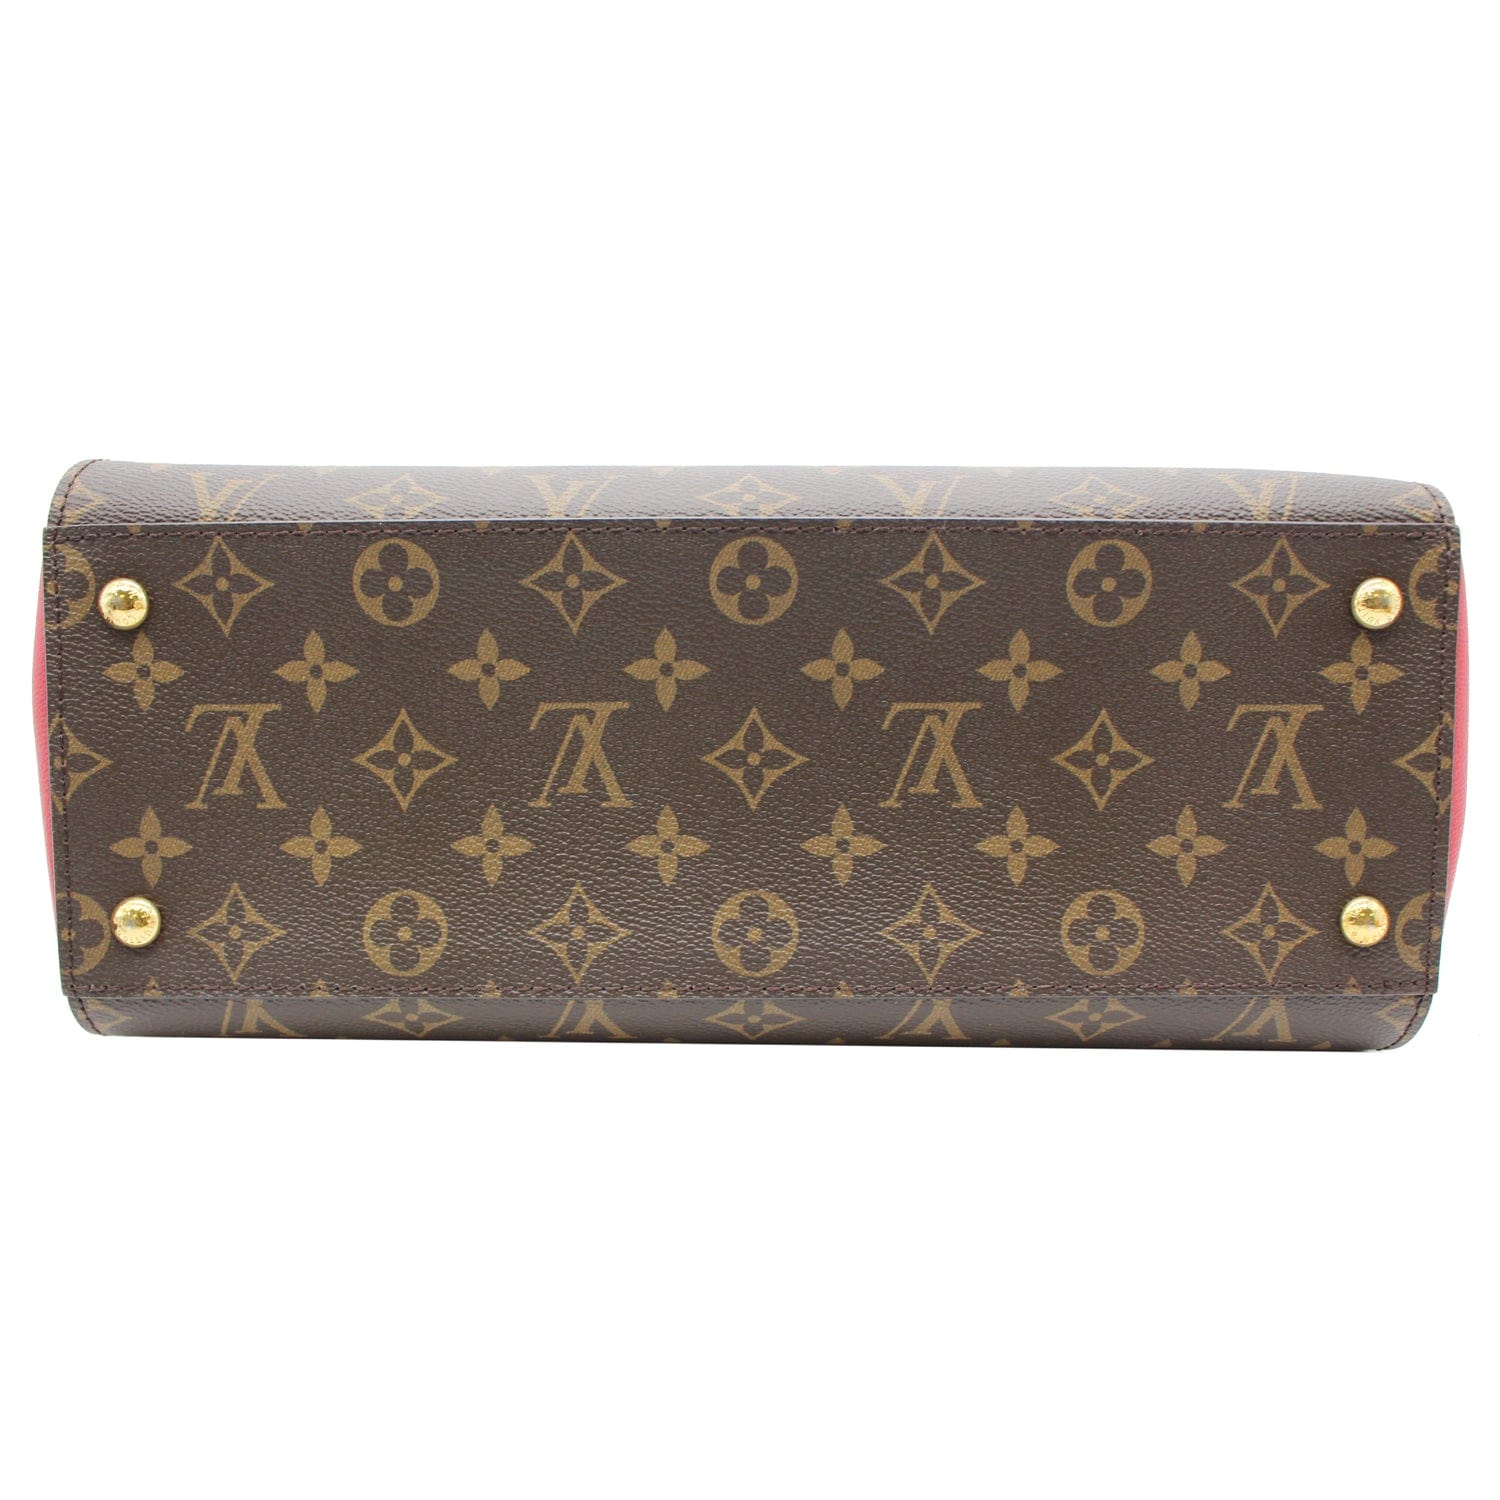 Louis Vuitton Florine Bag - Prestige Online Store - Luxury Items with  Exceptional Savings from the eShop